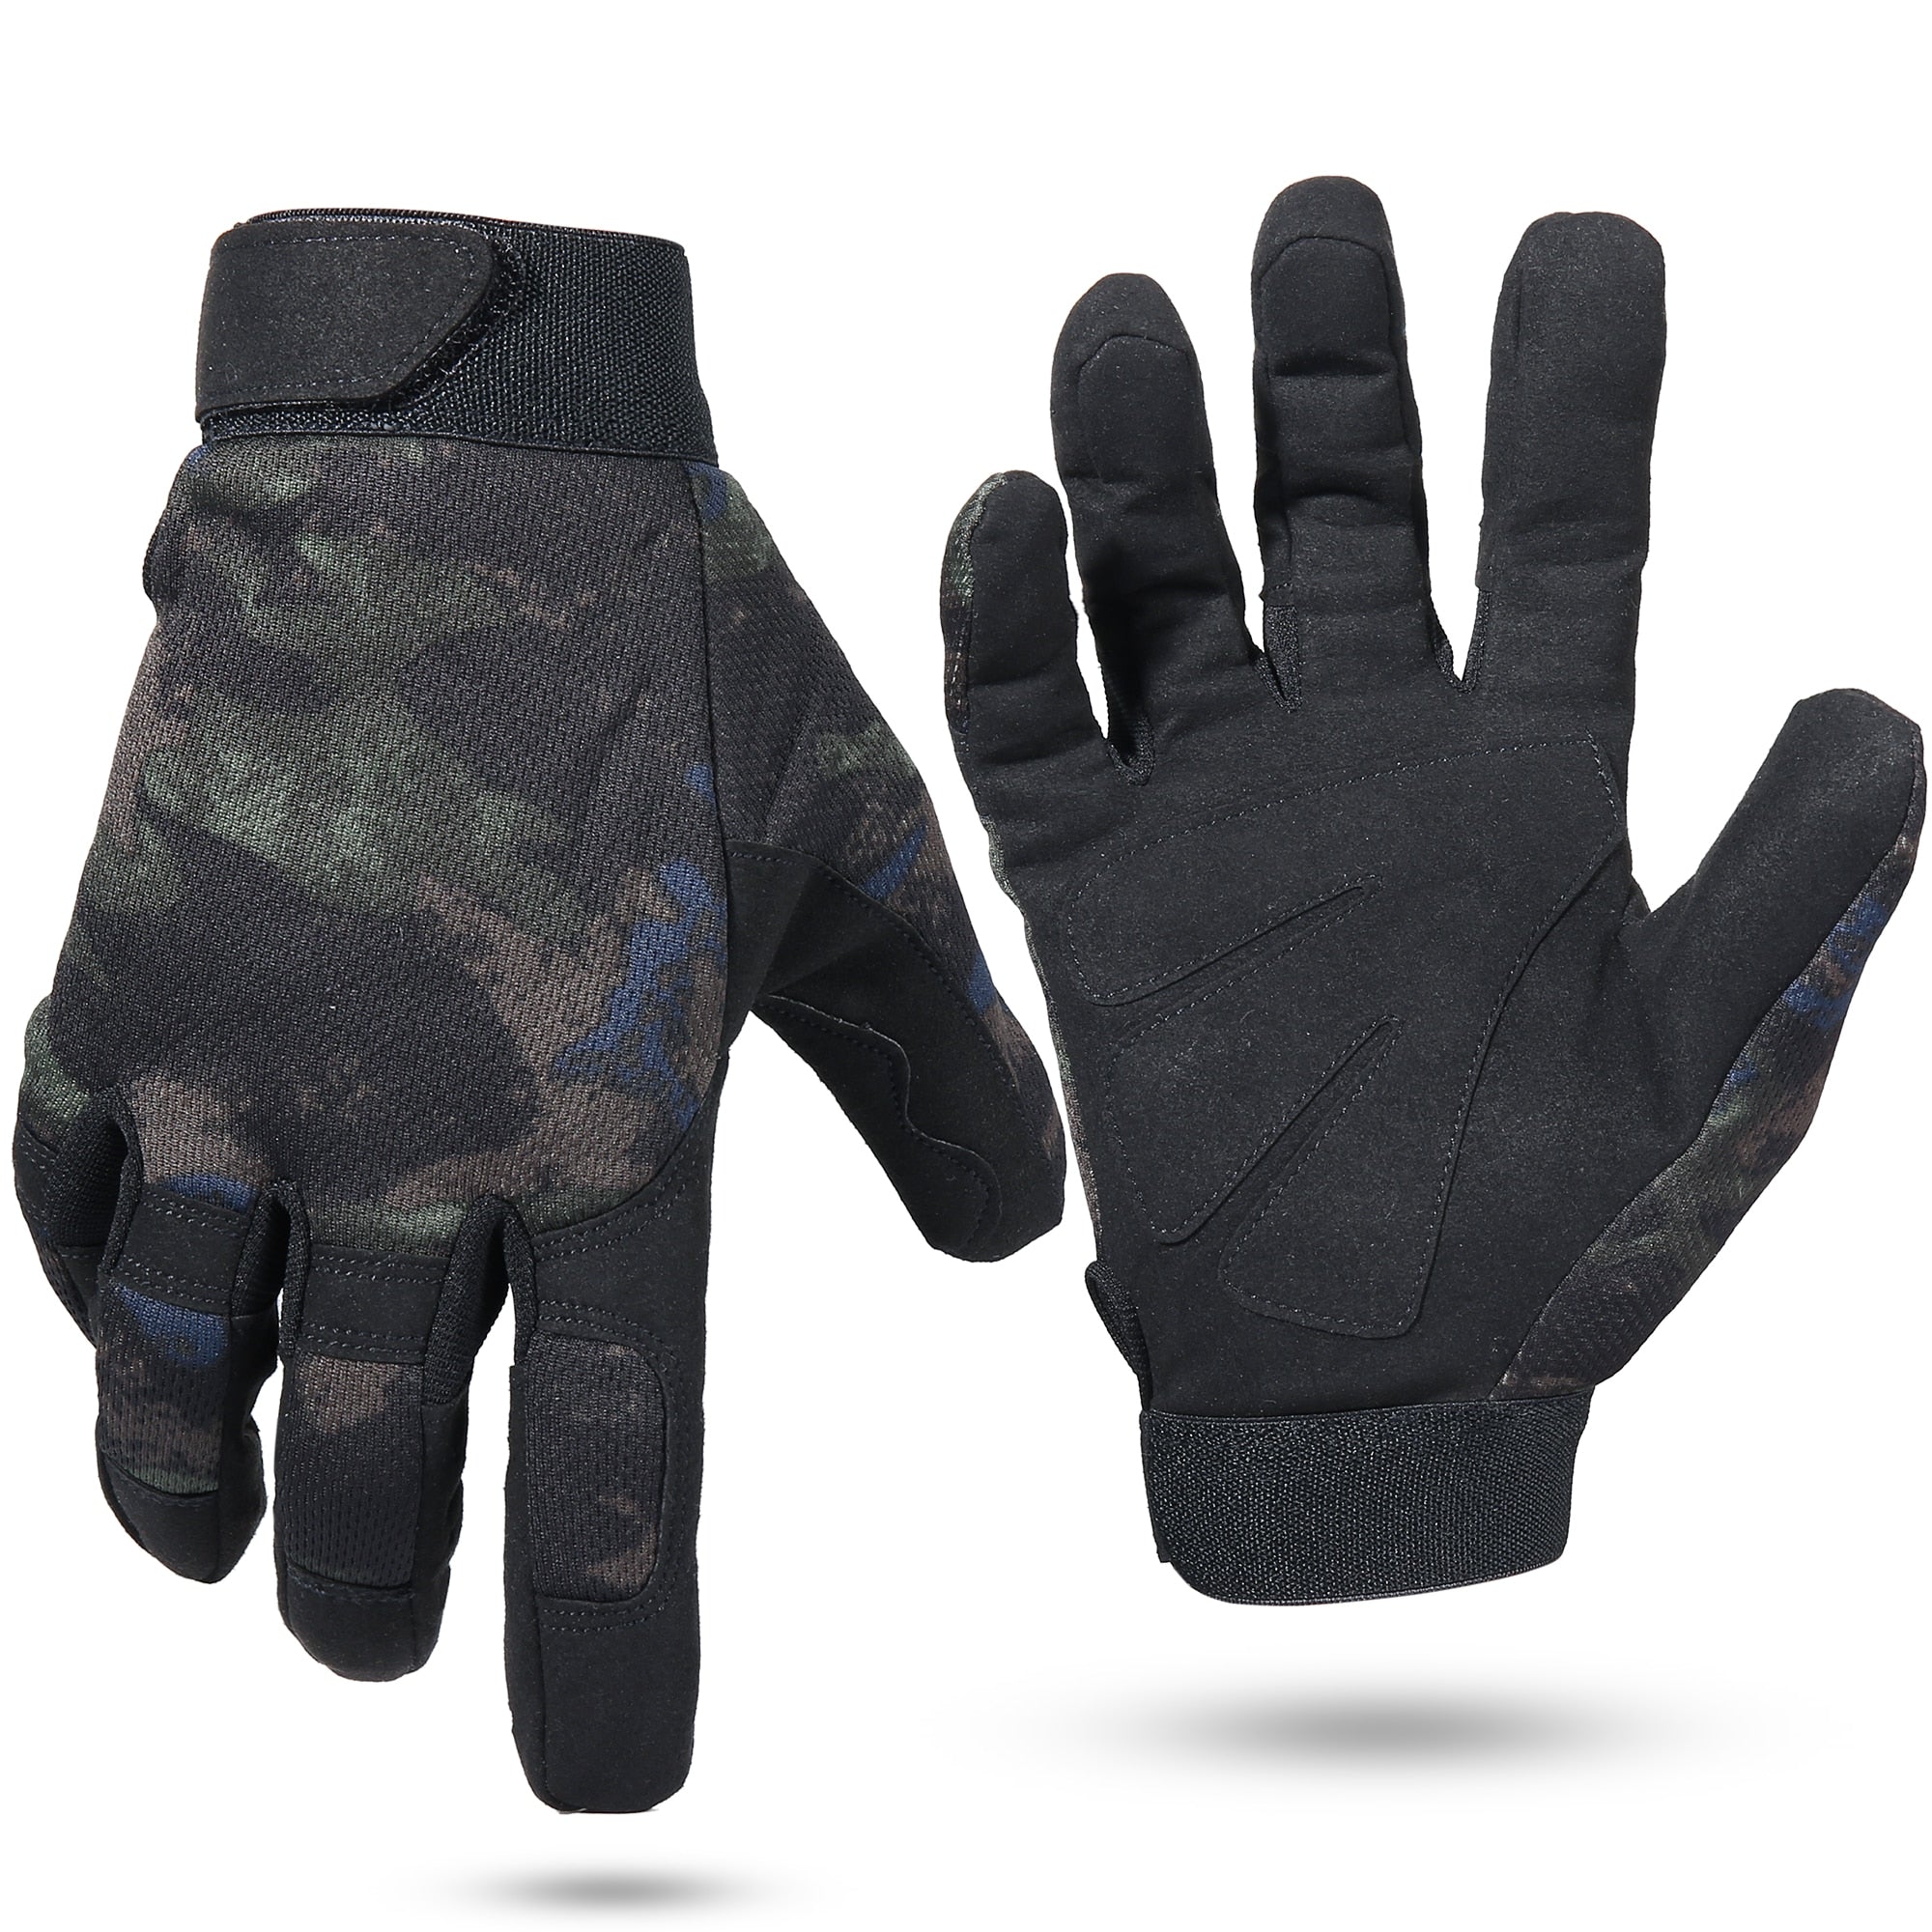 Multicam Tactical Gloves Antiskid Army Military Bicycle Airsoft Motorcycle Shoot Paintball